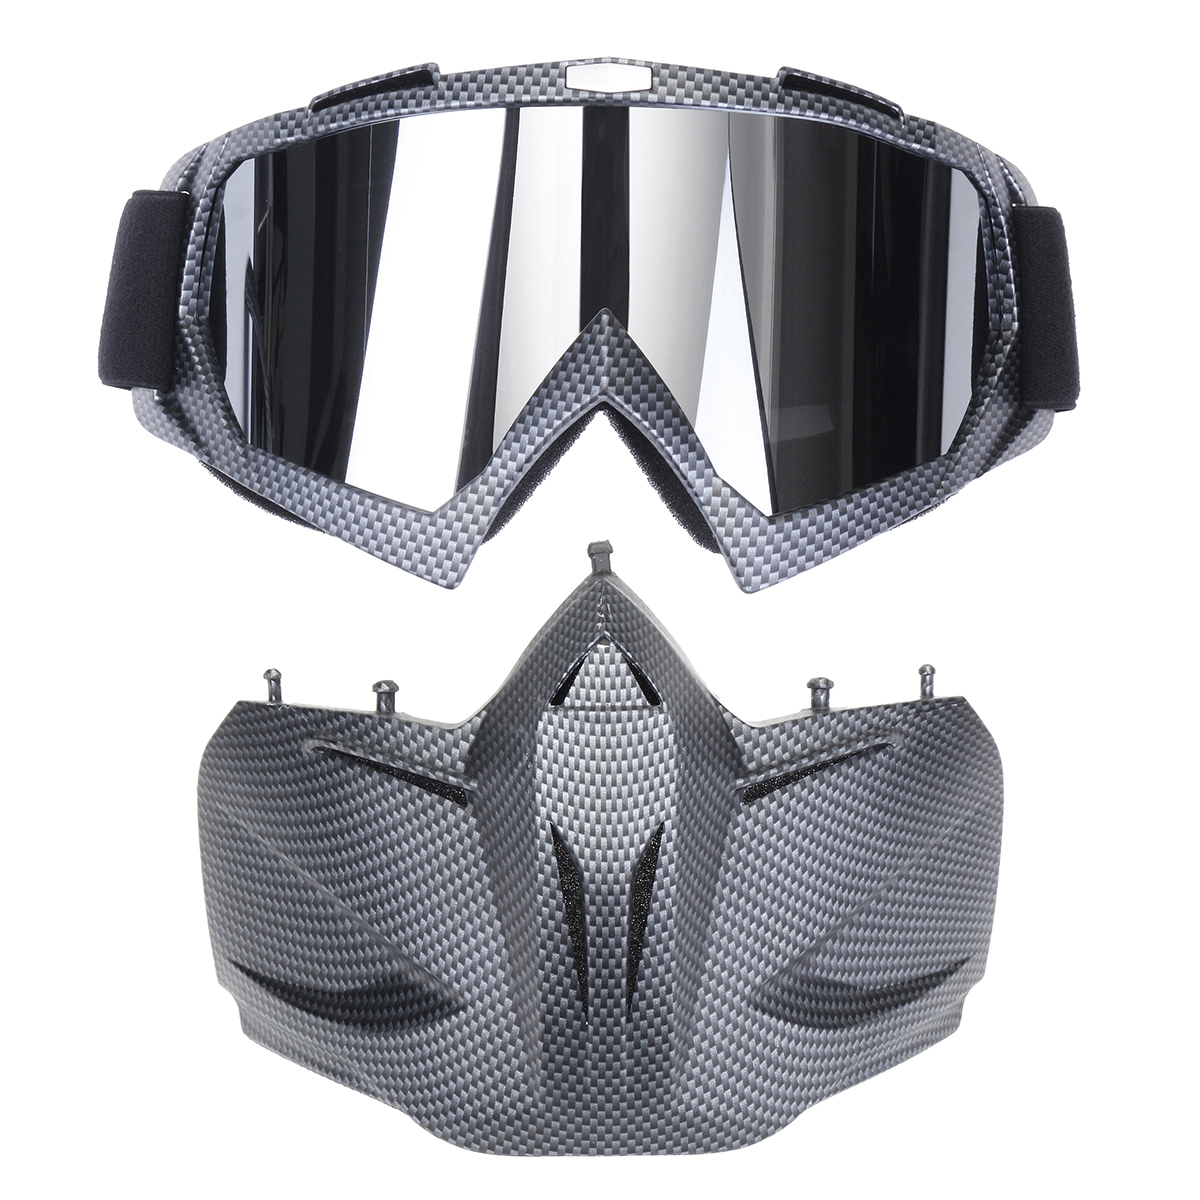 5-Colorful-Len-Flexible-Goggles-Glasses-Face-Mask-Motorcycle-Riding-ATV-Dirt-Bike-Security-1368079